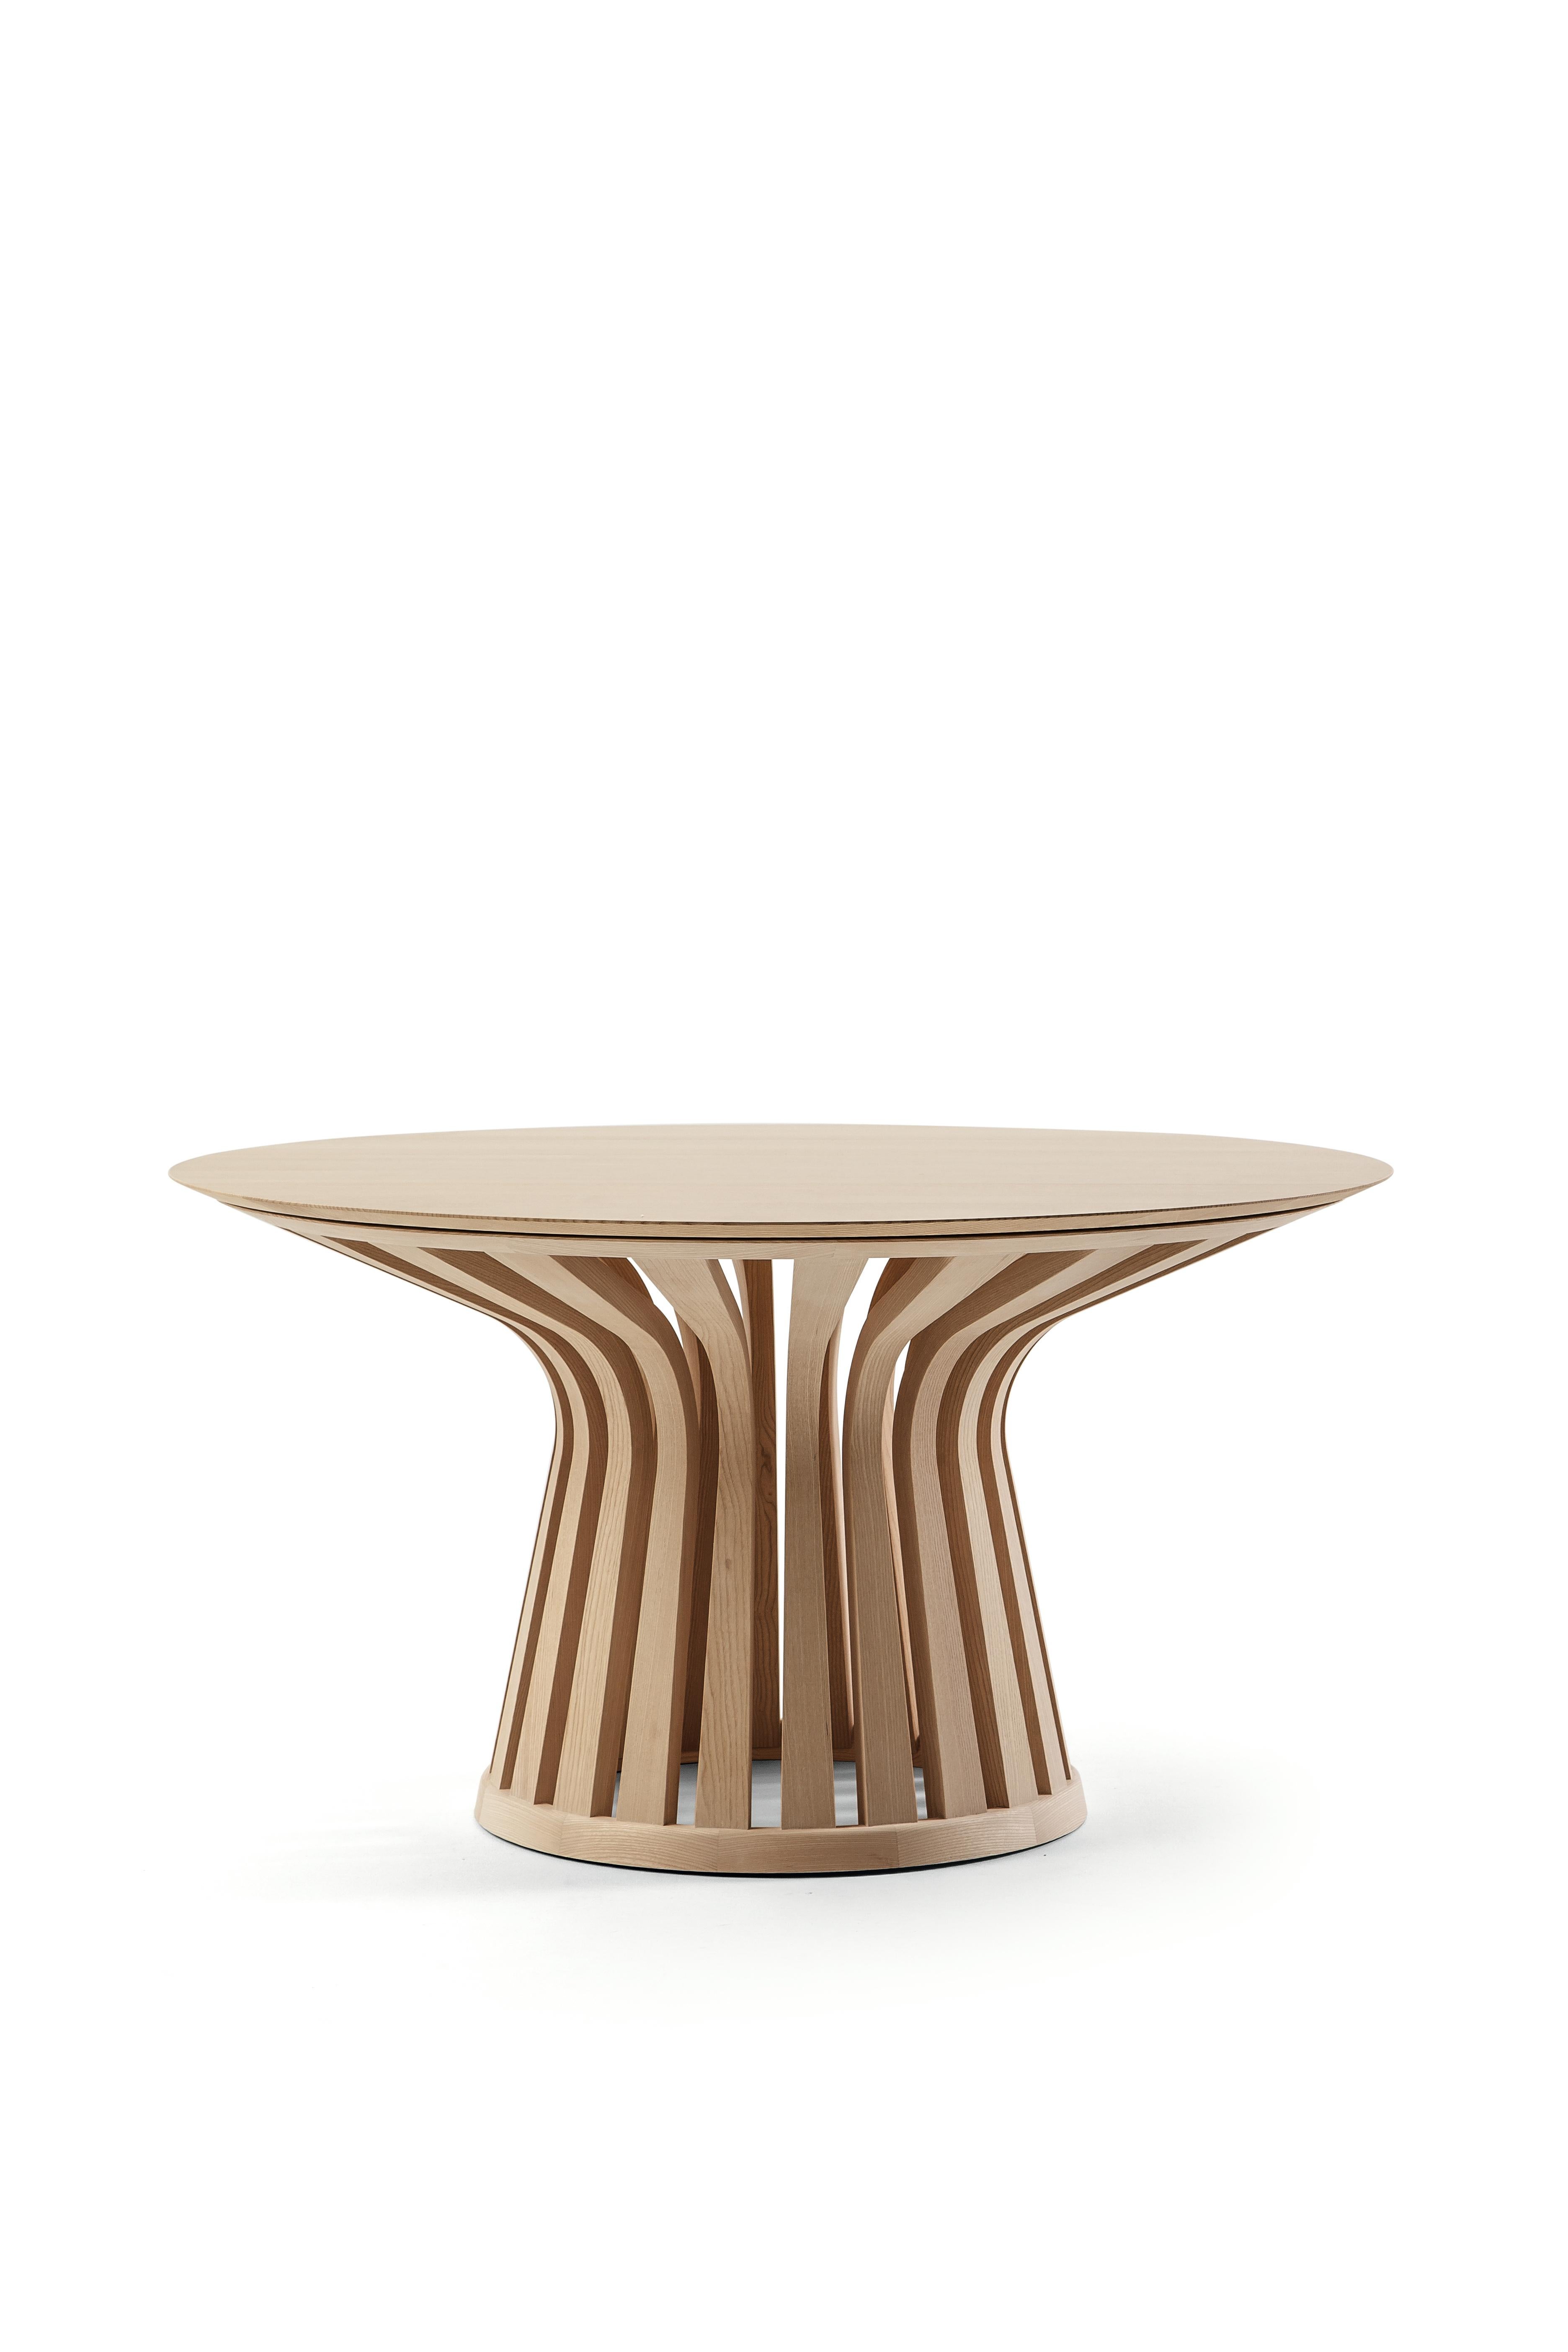 Lebeau Wood Table by Patrick Jouin For Sale 5